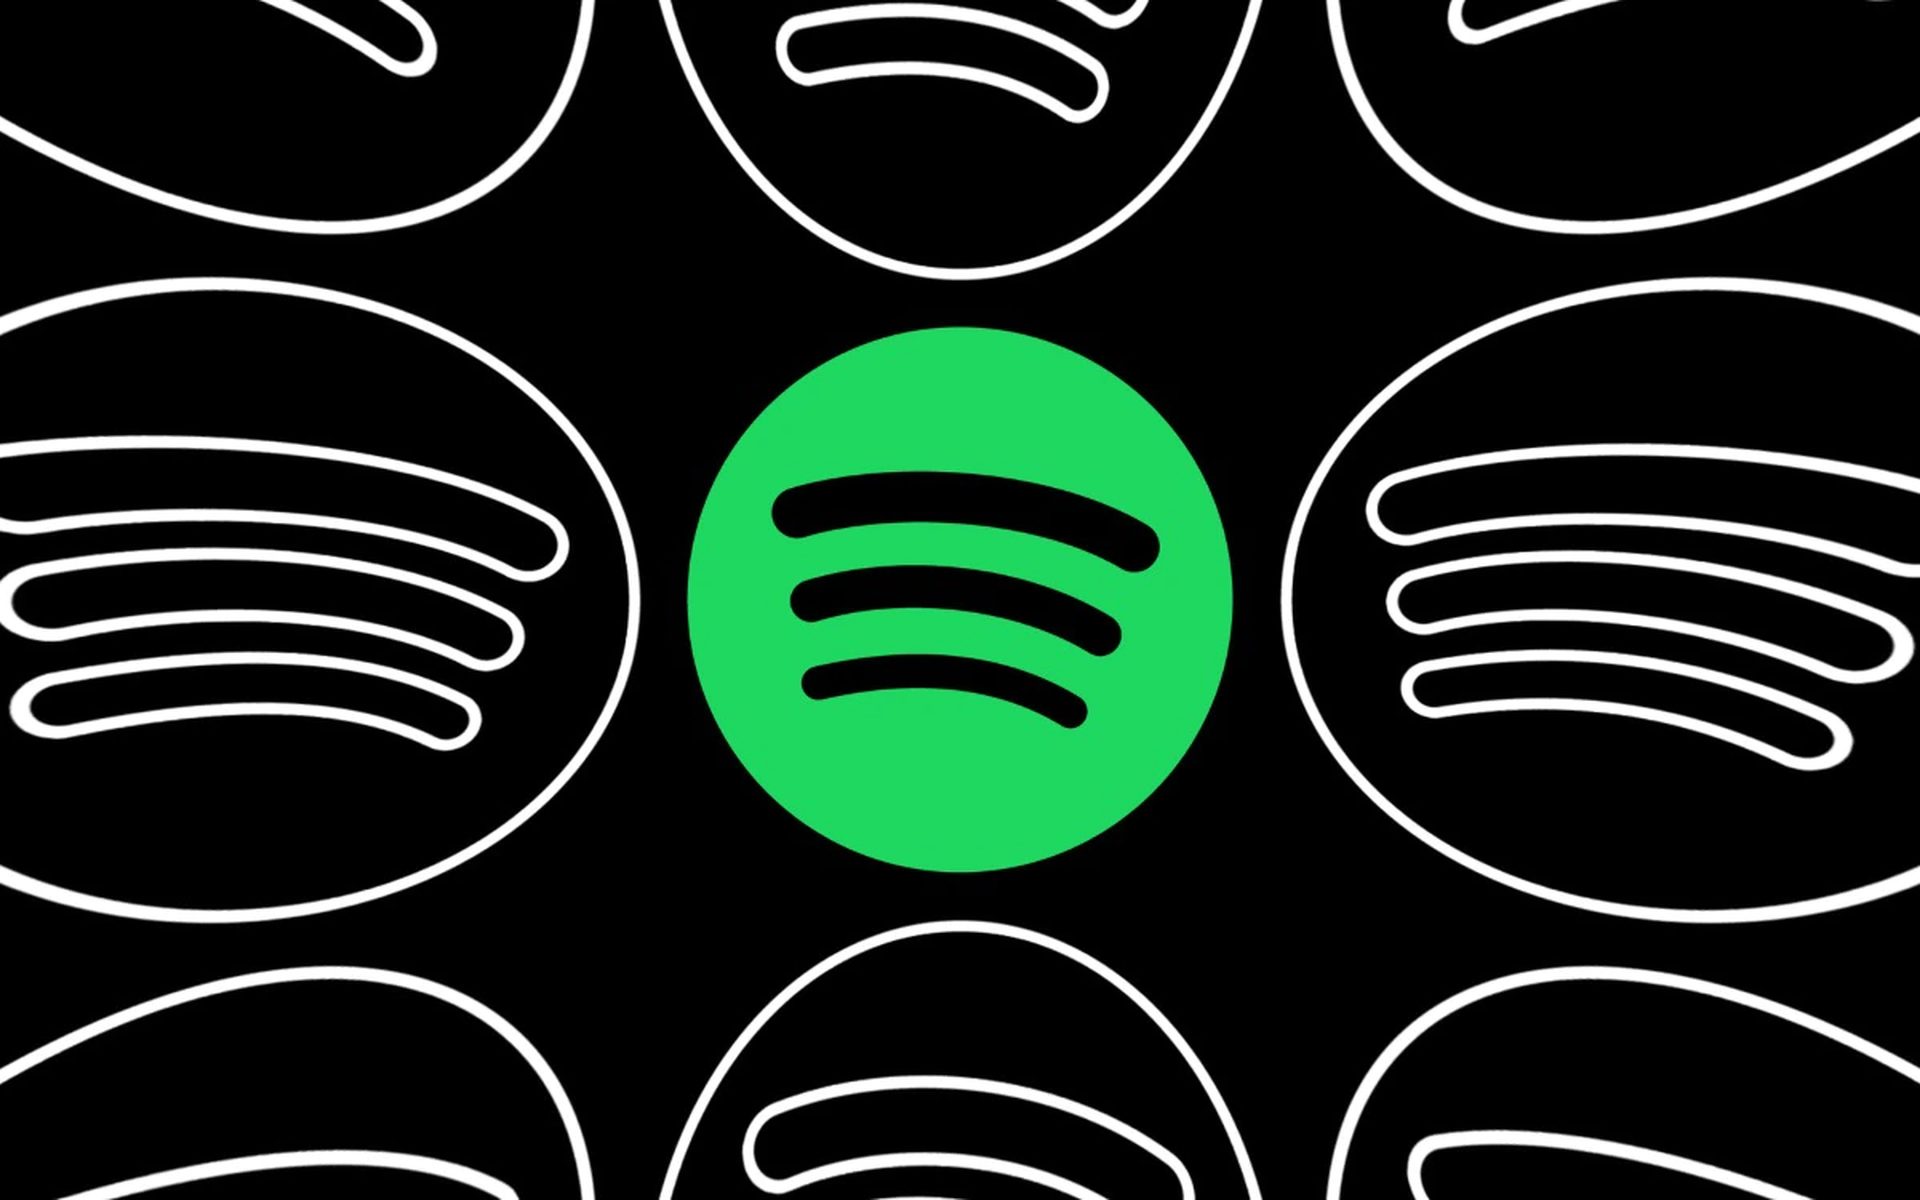 Spotify's AI purge has started